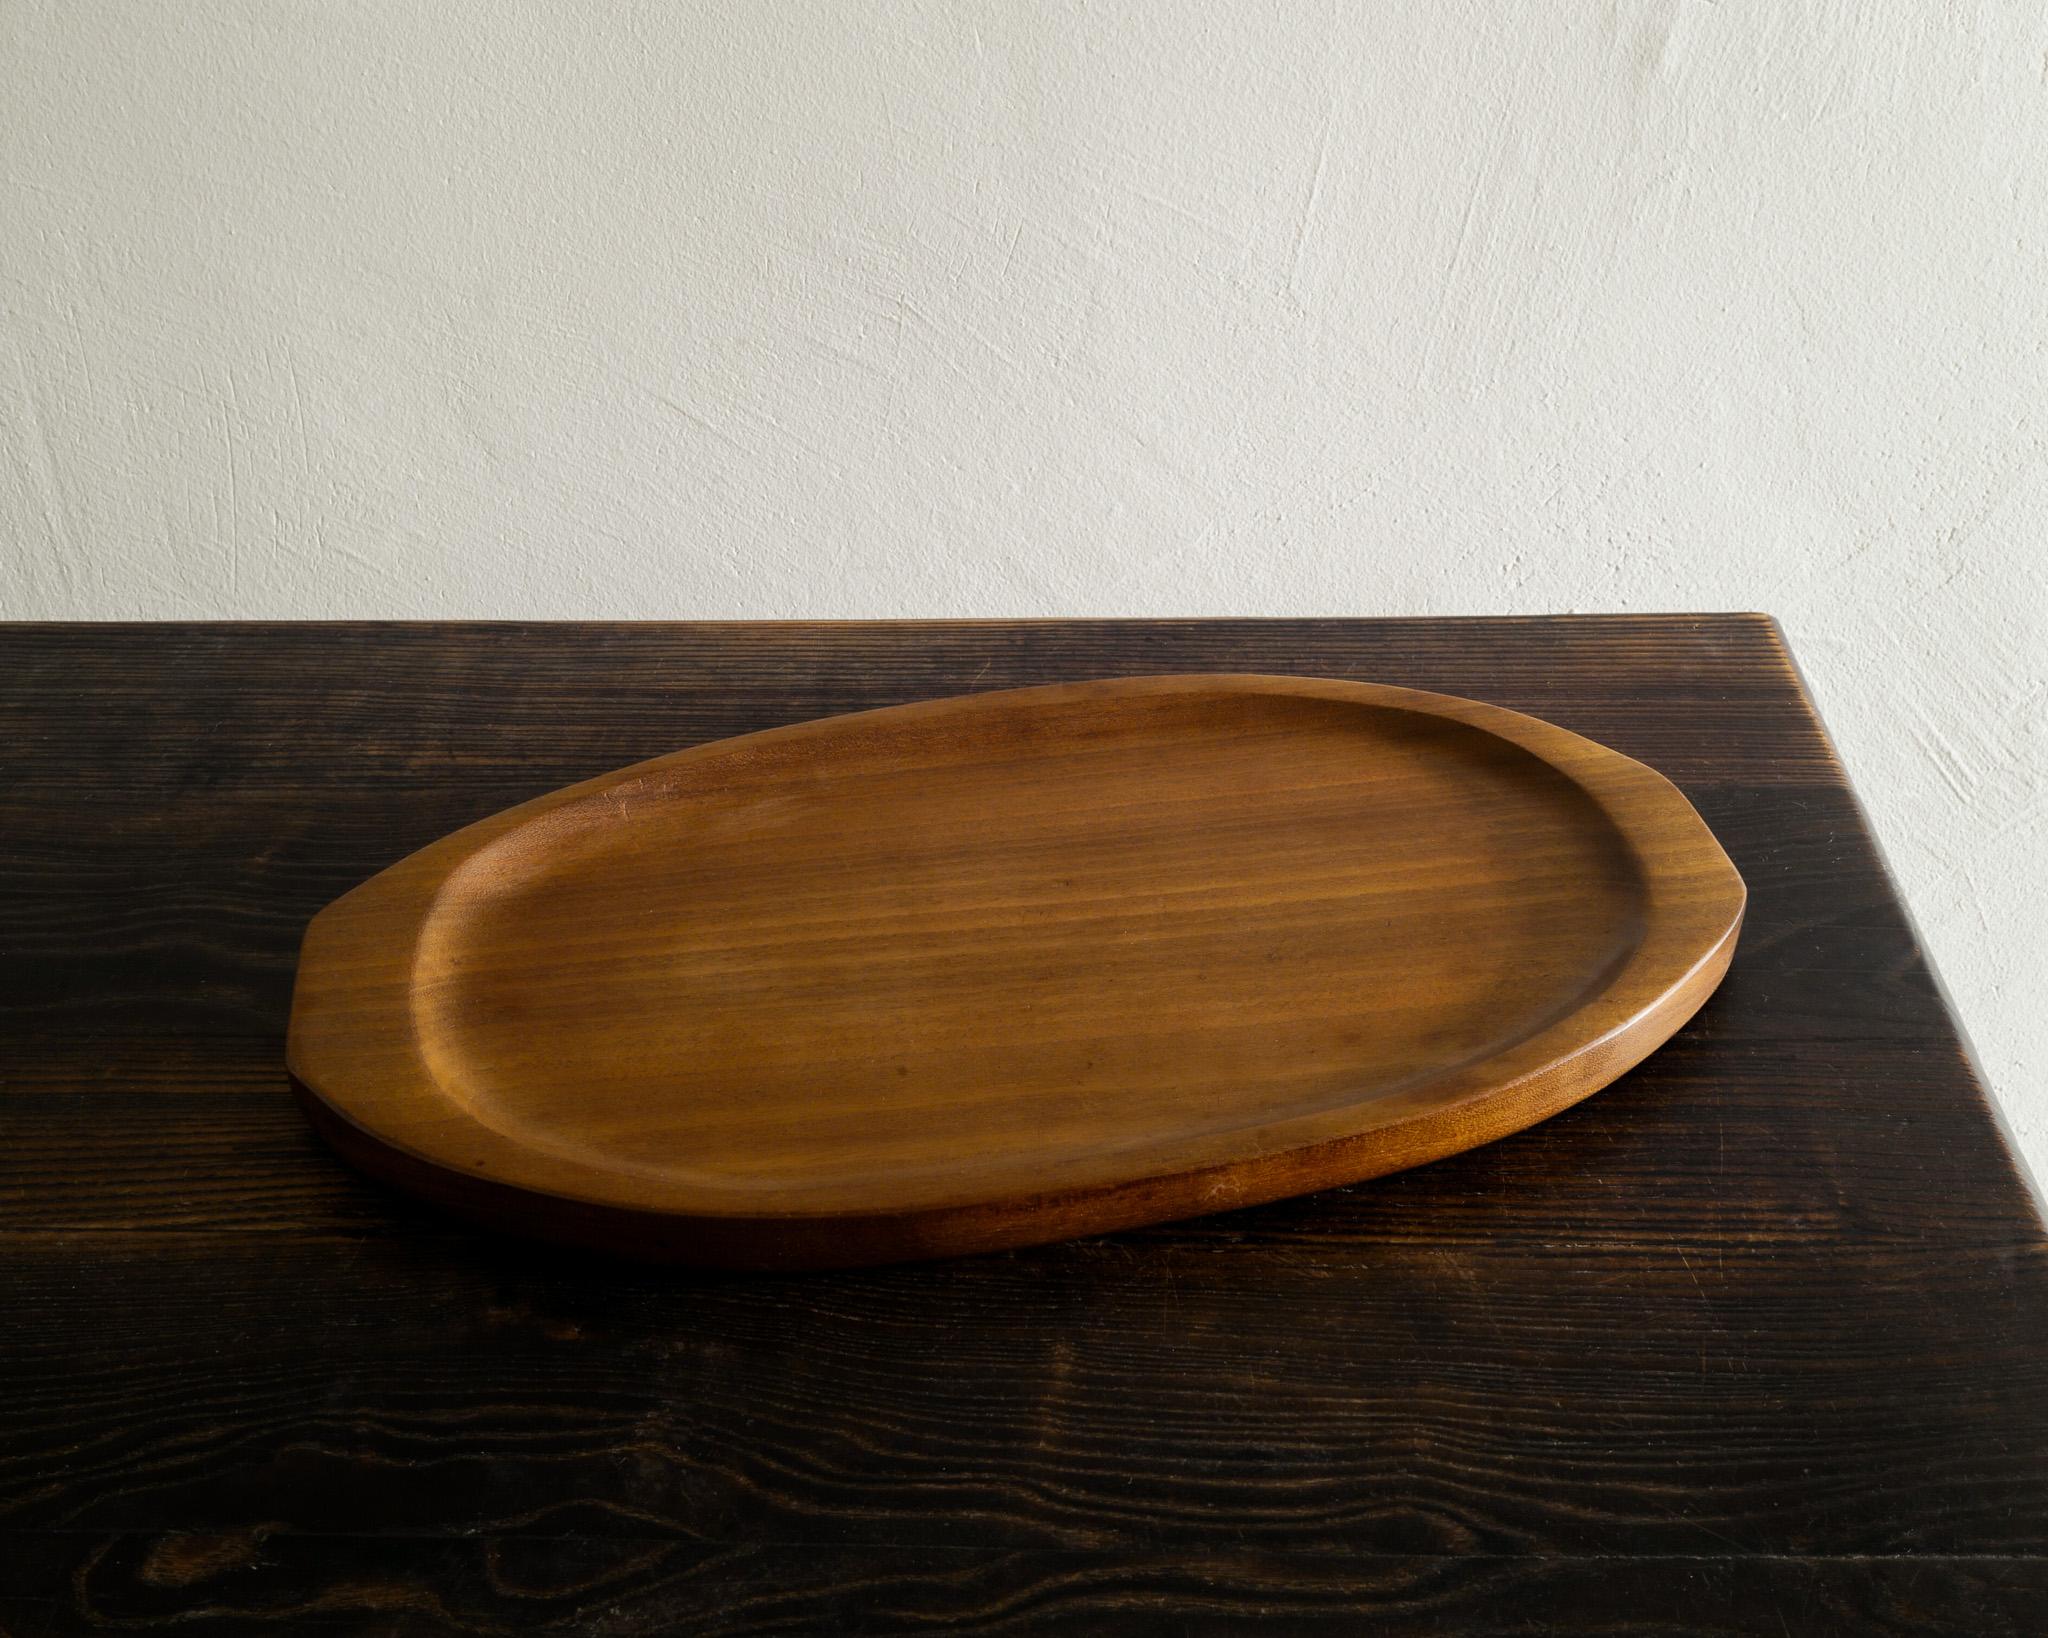 Very rare tray / dish with handles in solid carved wood by the French master Alexandre Noll. In good original condition. Signed. 

Dimensions: H: 2.5 cm / 1